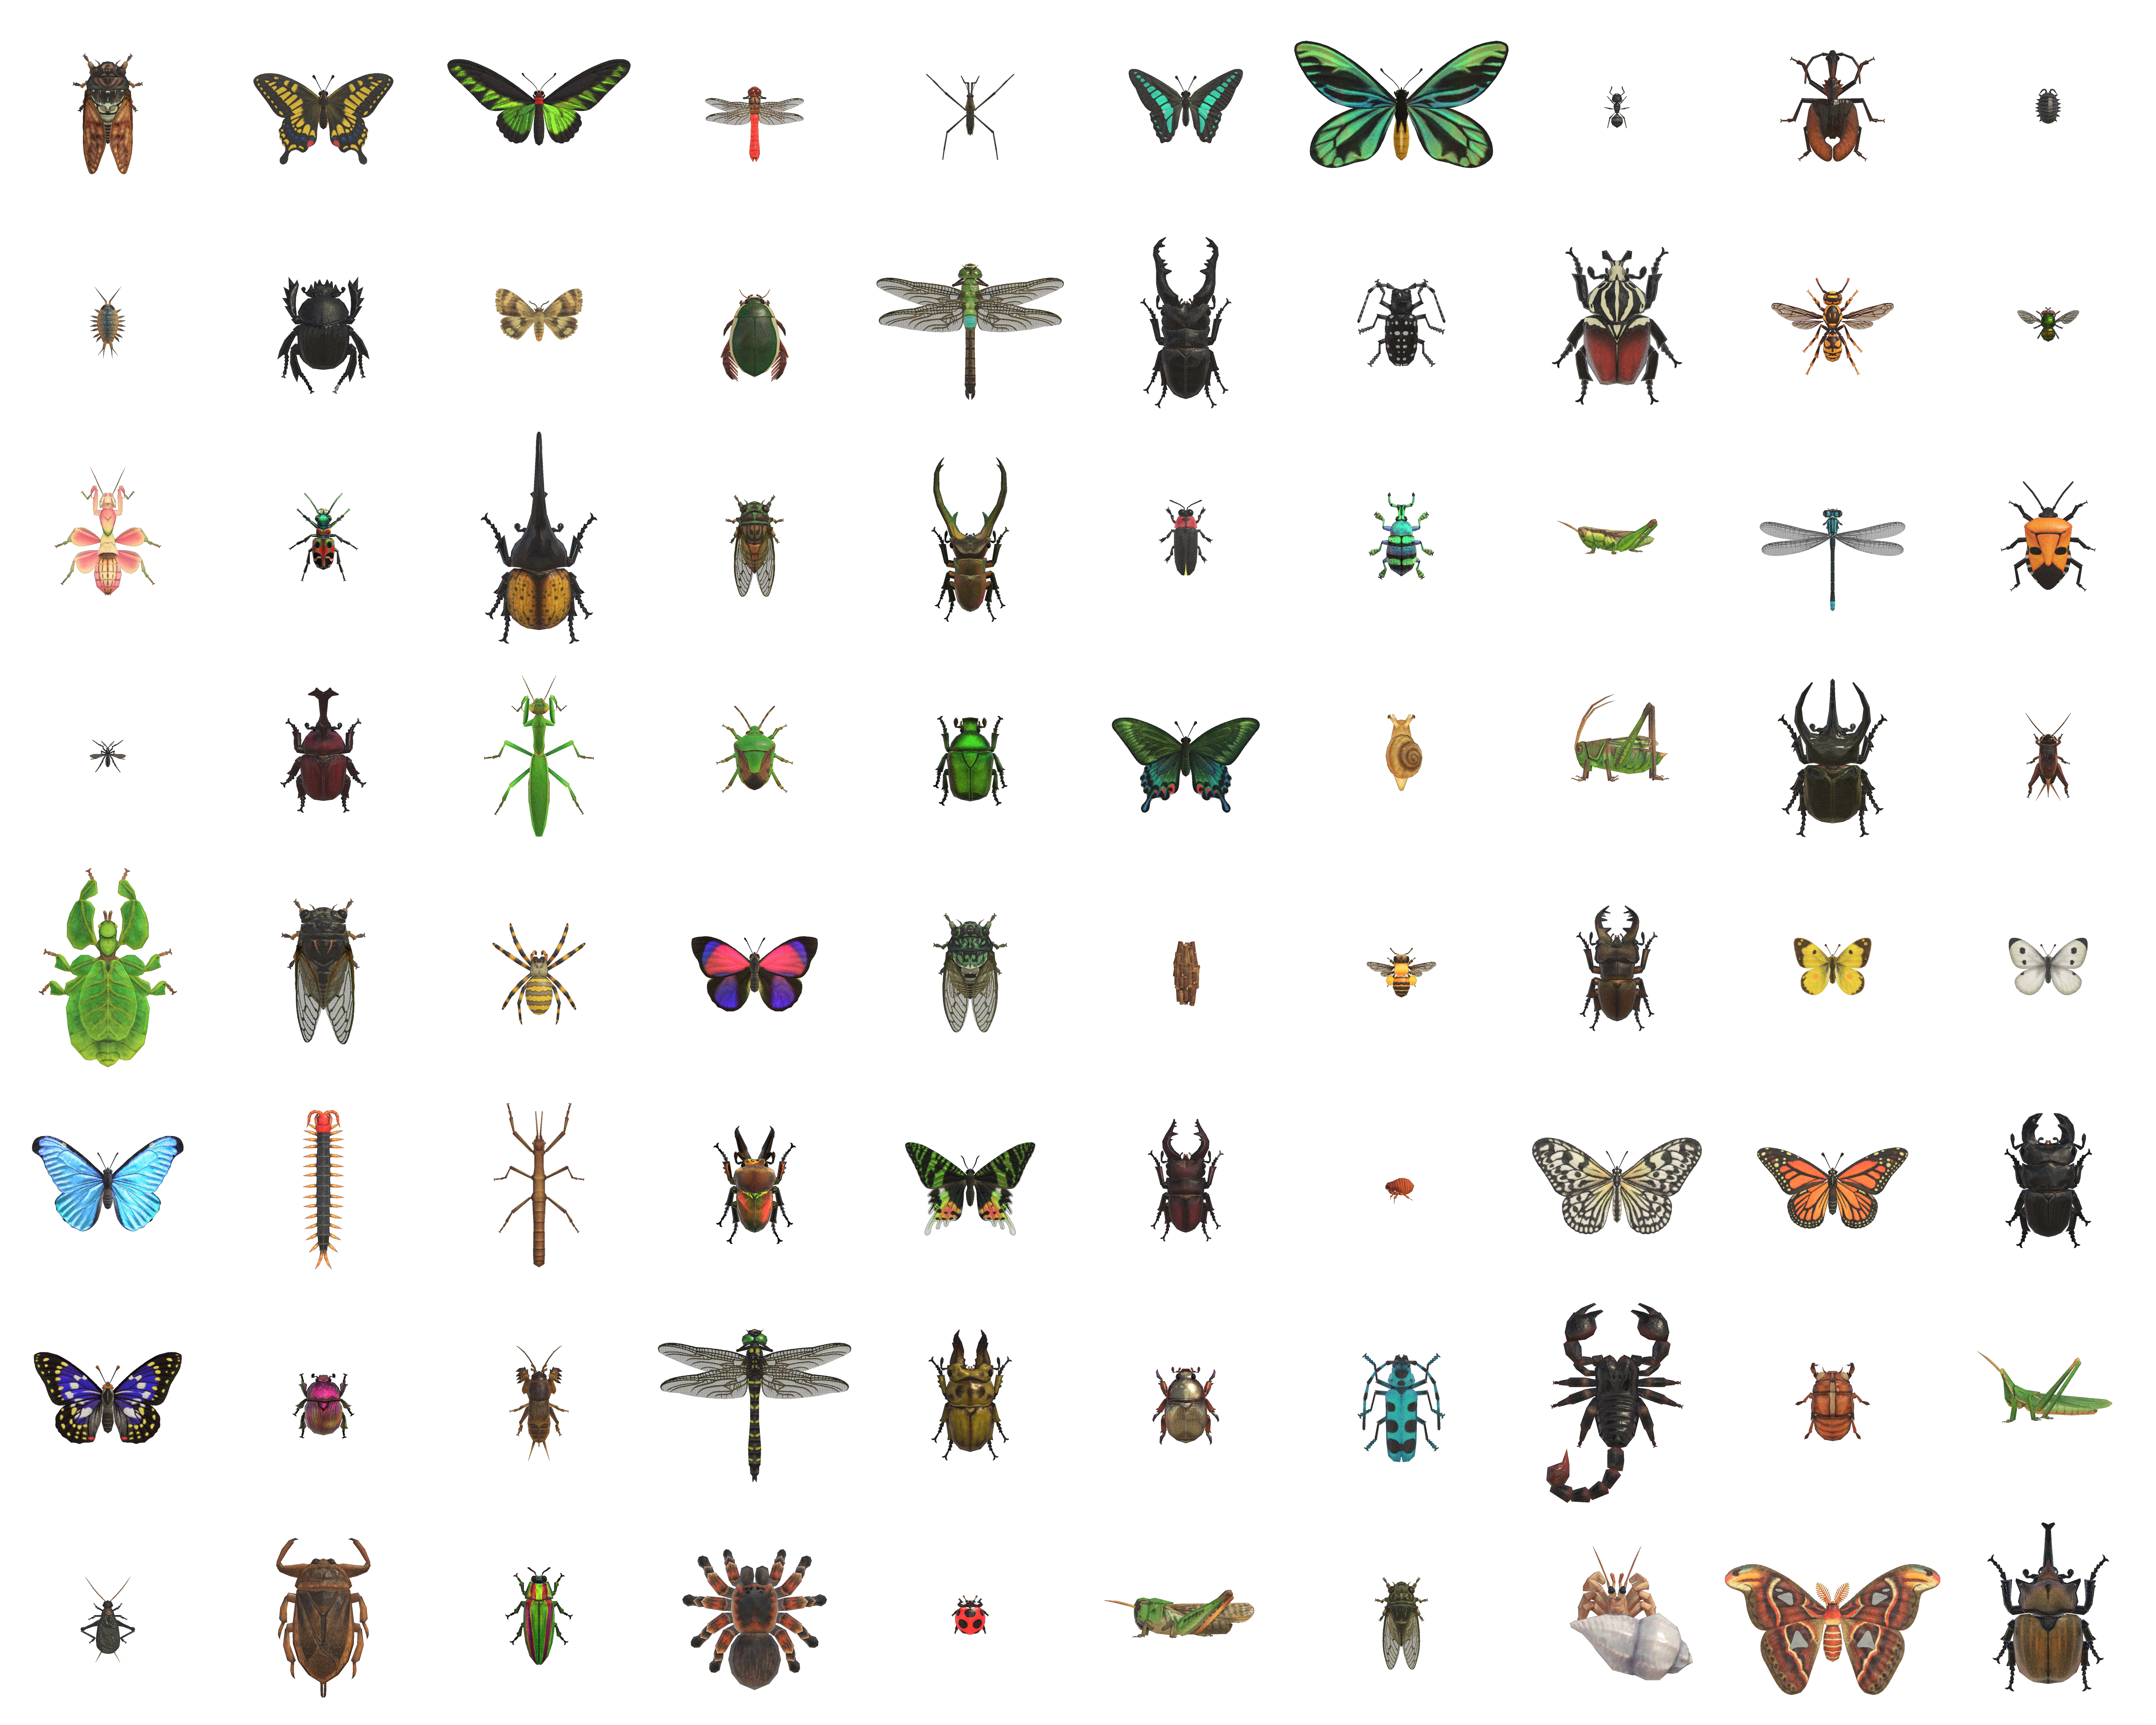 Animal Crossing: New Horizons - Insects